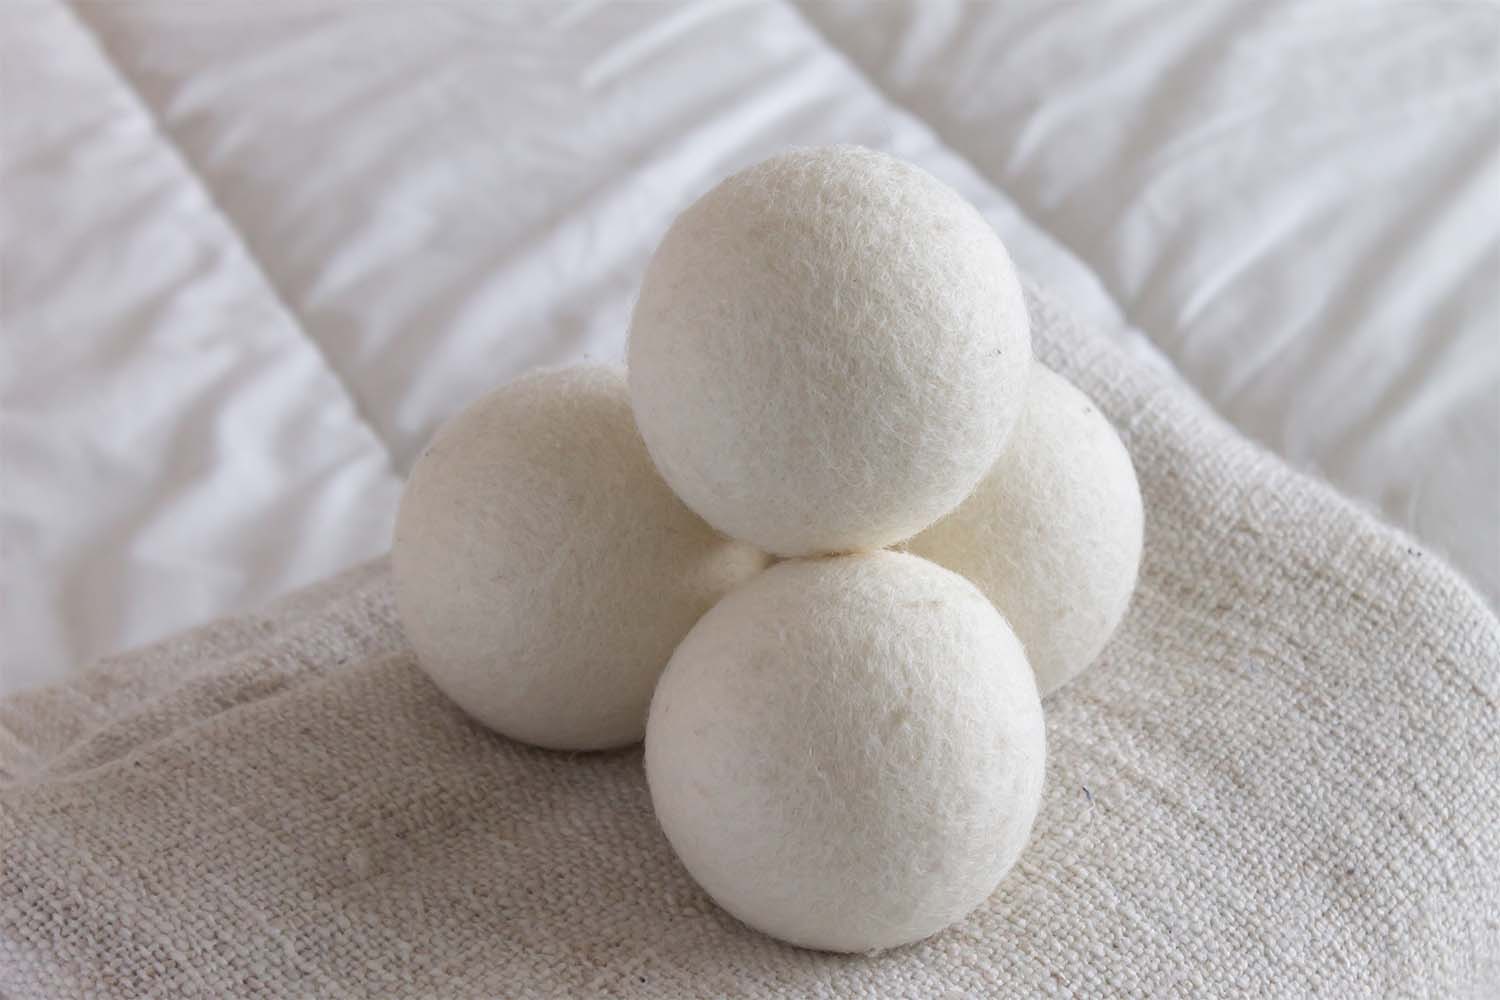 Dryer Balls vs. Dryer Sheets: Which Are Better?